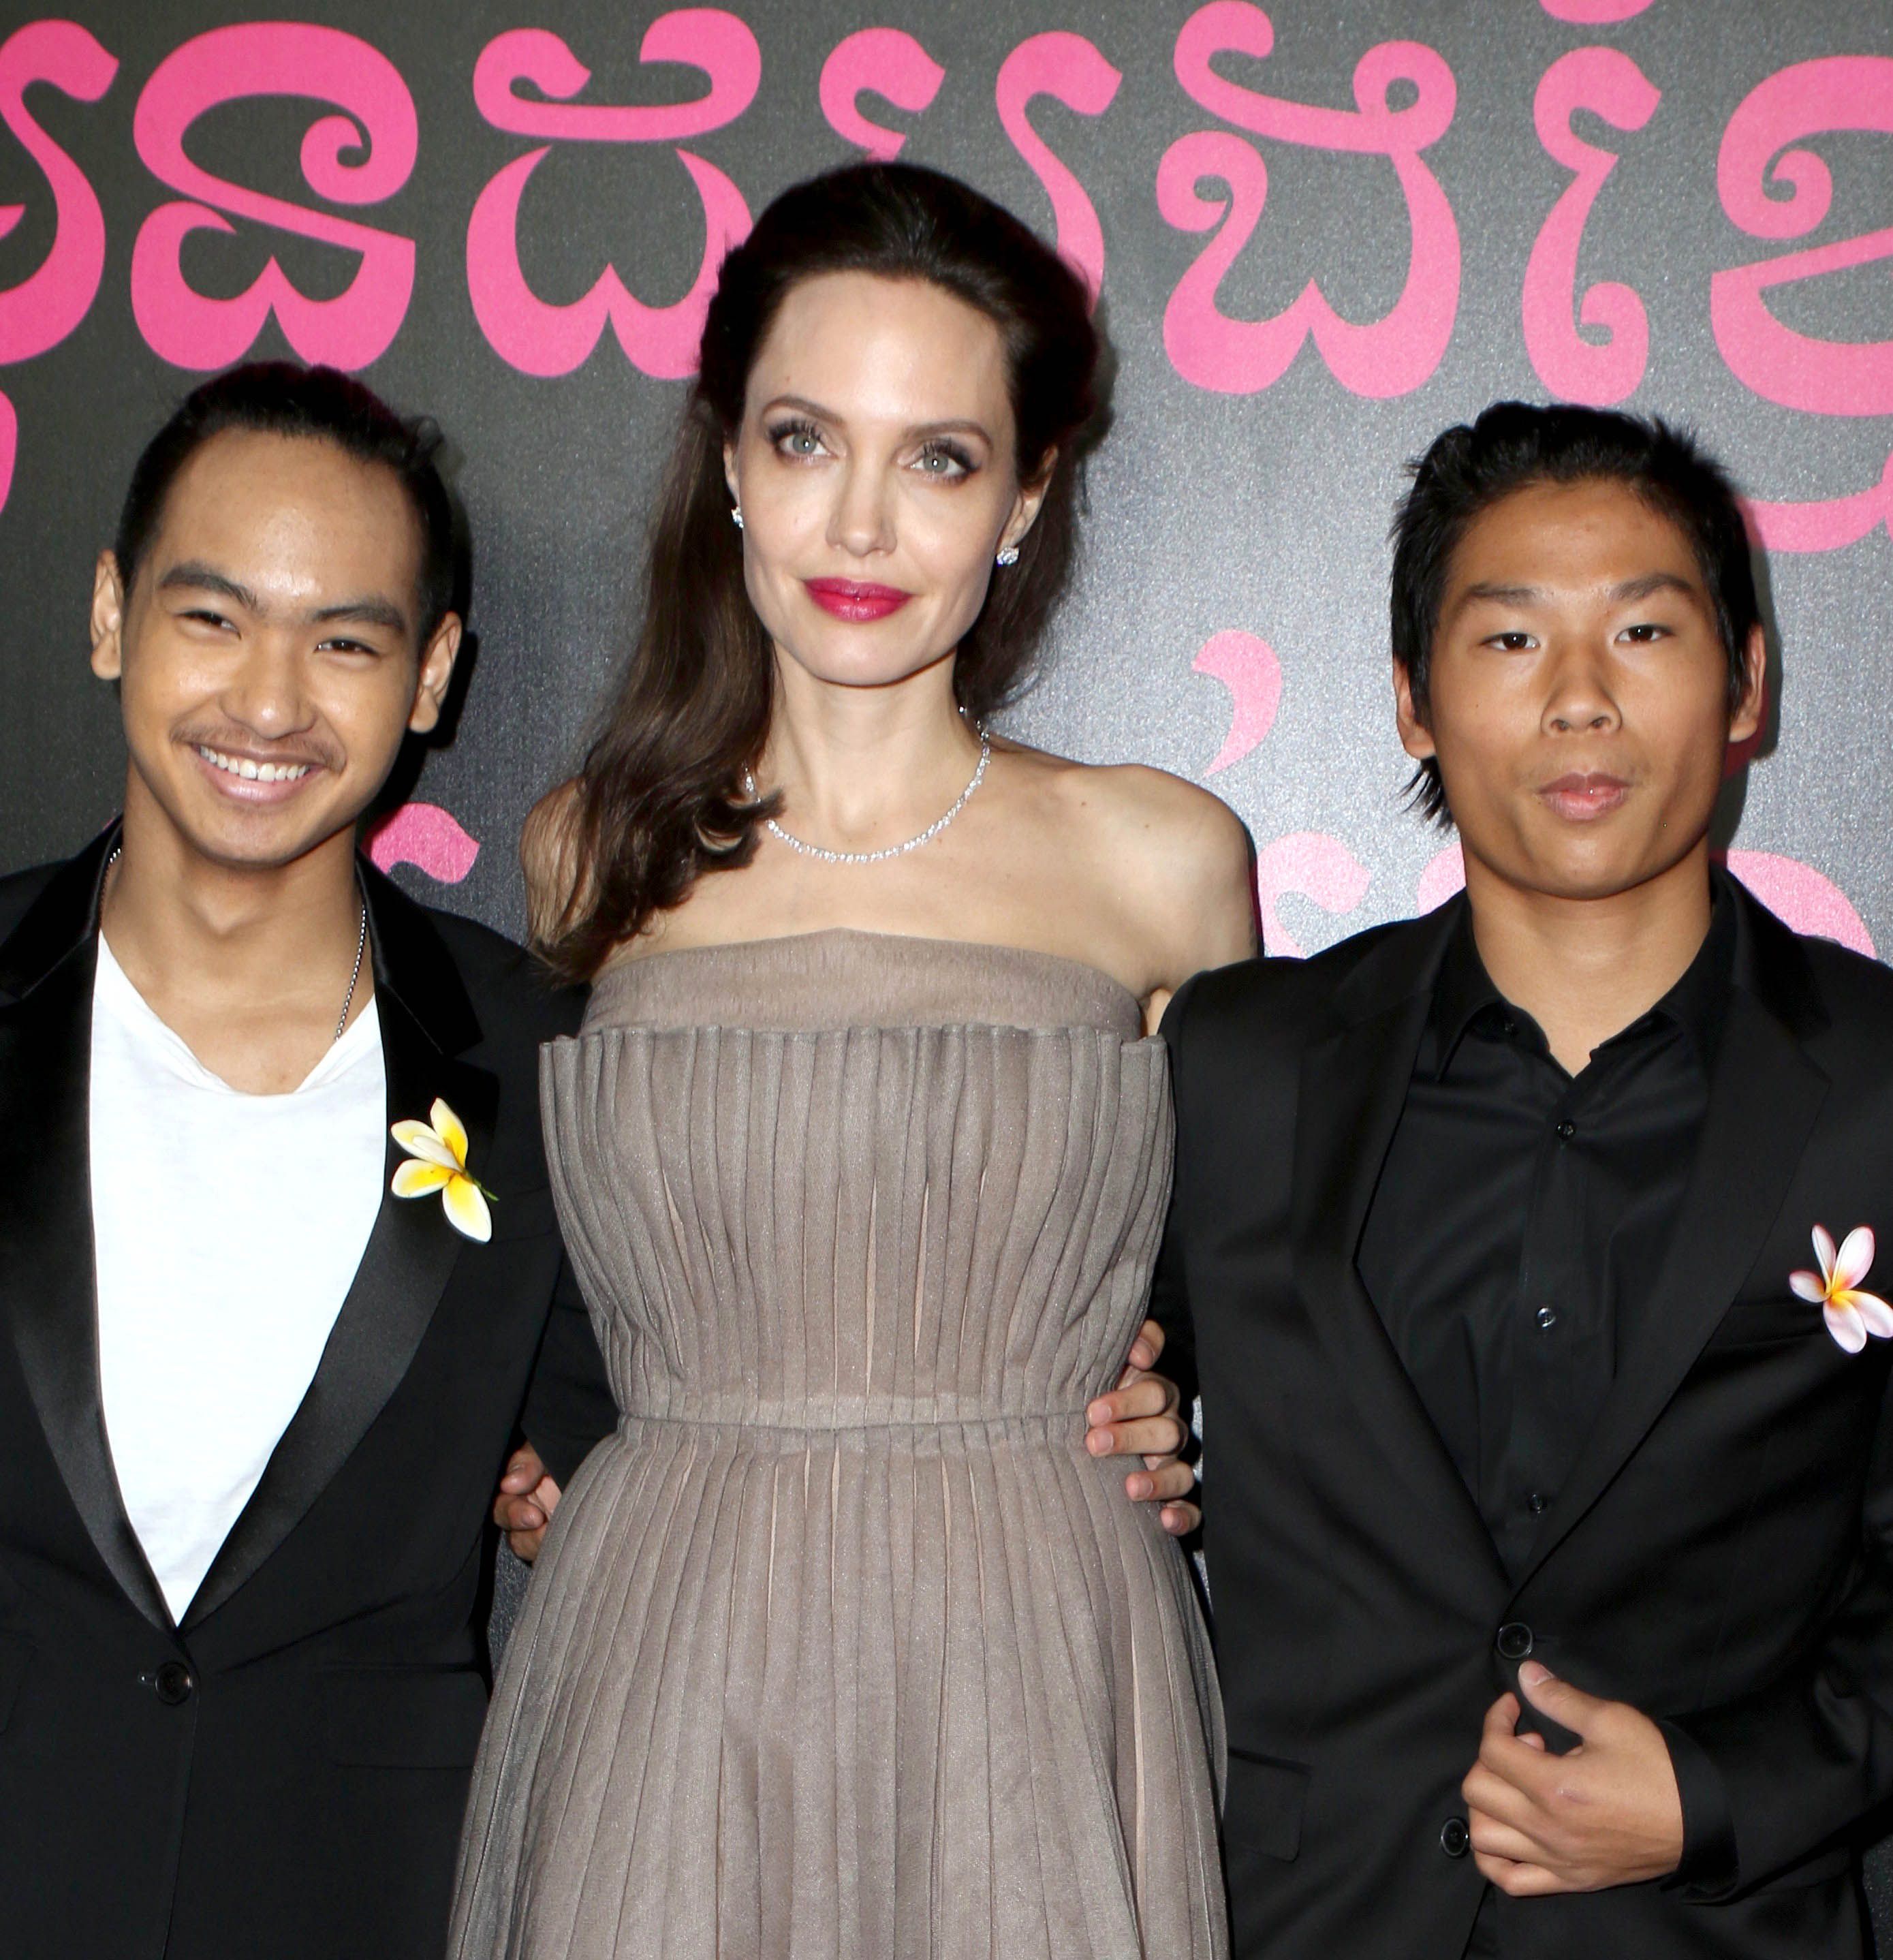  Angelina Jolie and her sons, Knox Leon Jolie-Pitt, Pax Thien Jolie-Pitt at the New York Premiere of First They Killed My Father